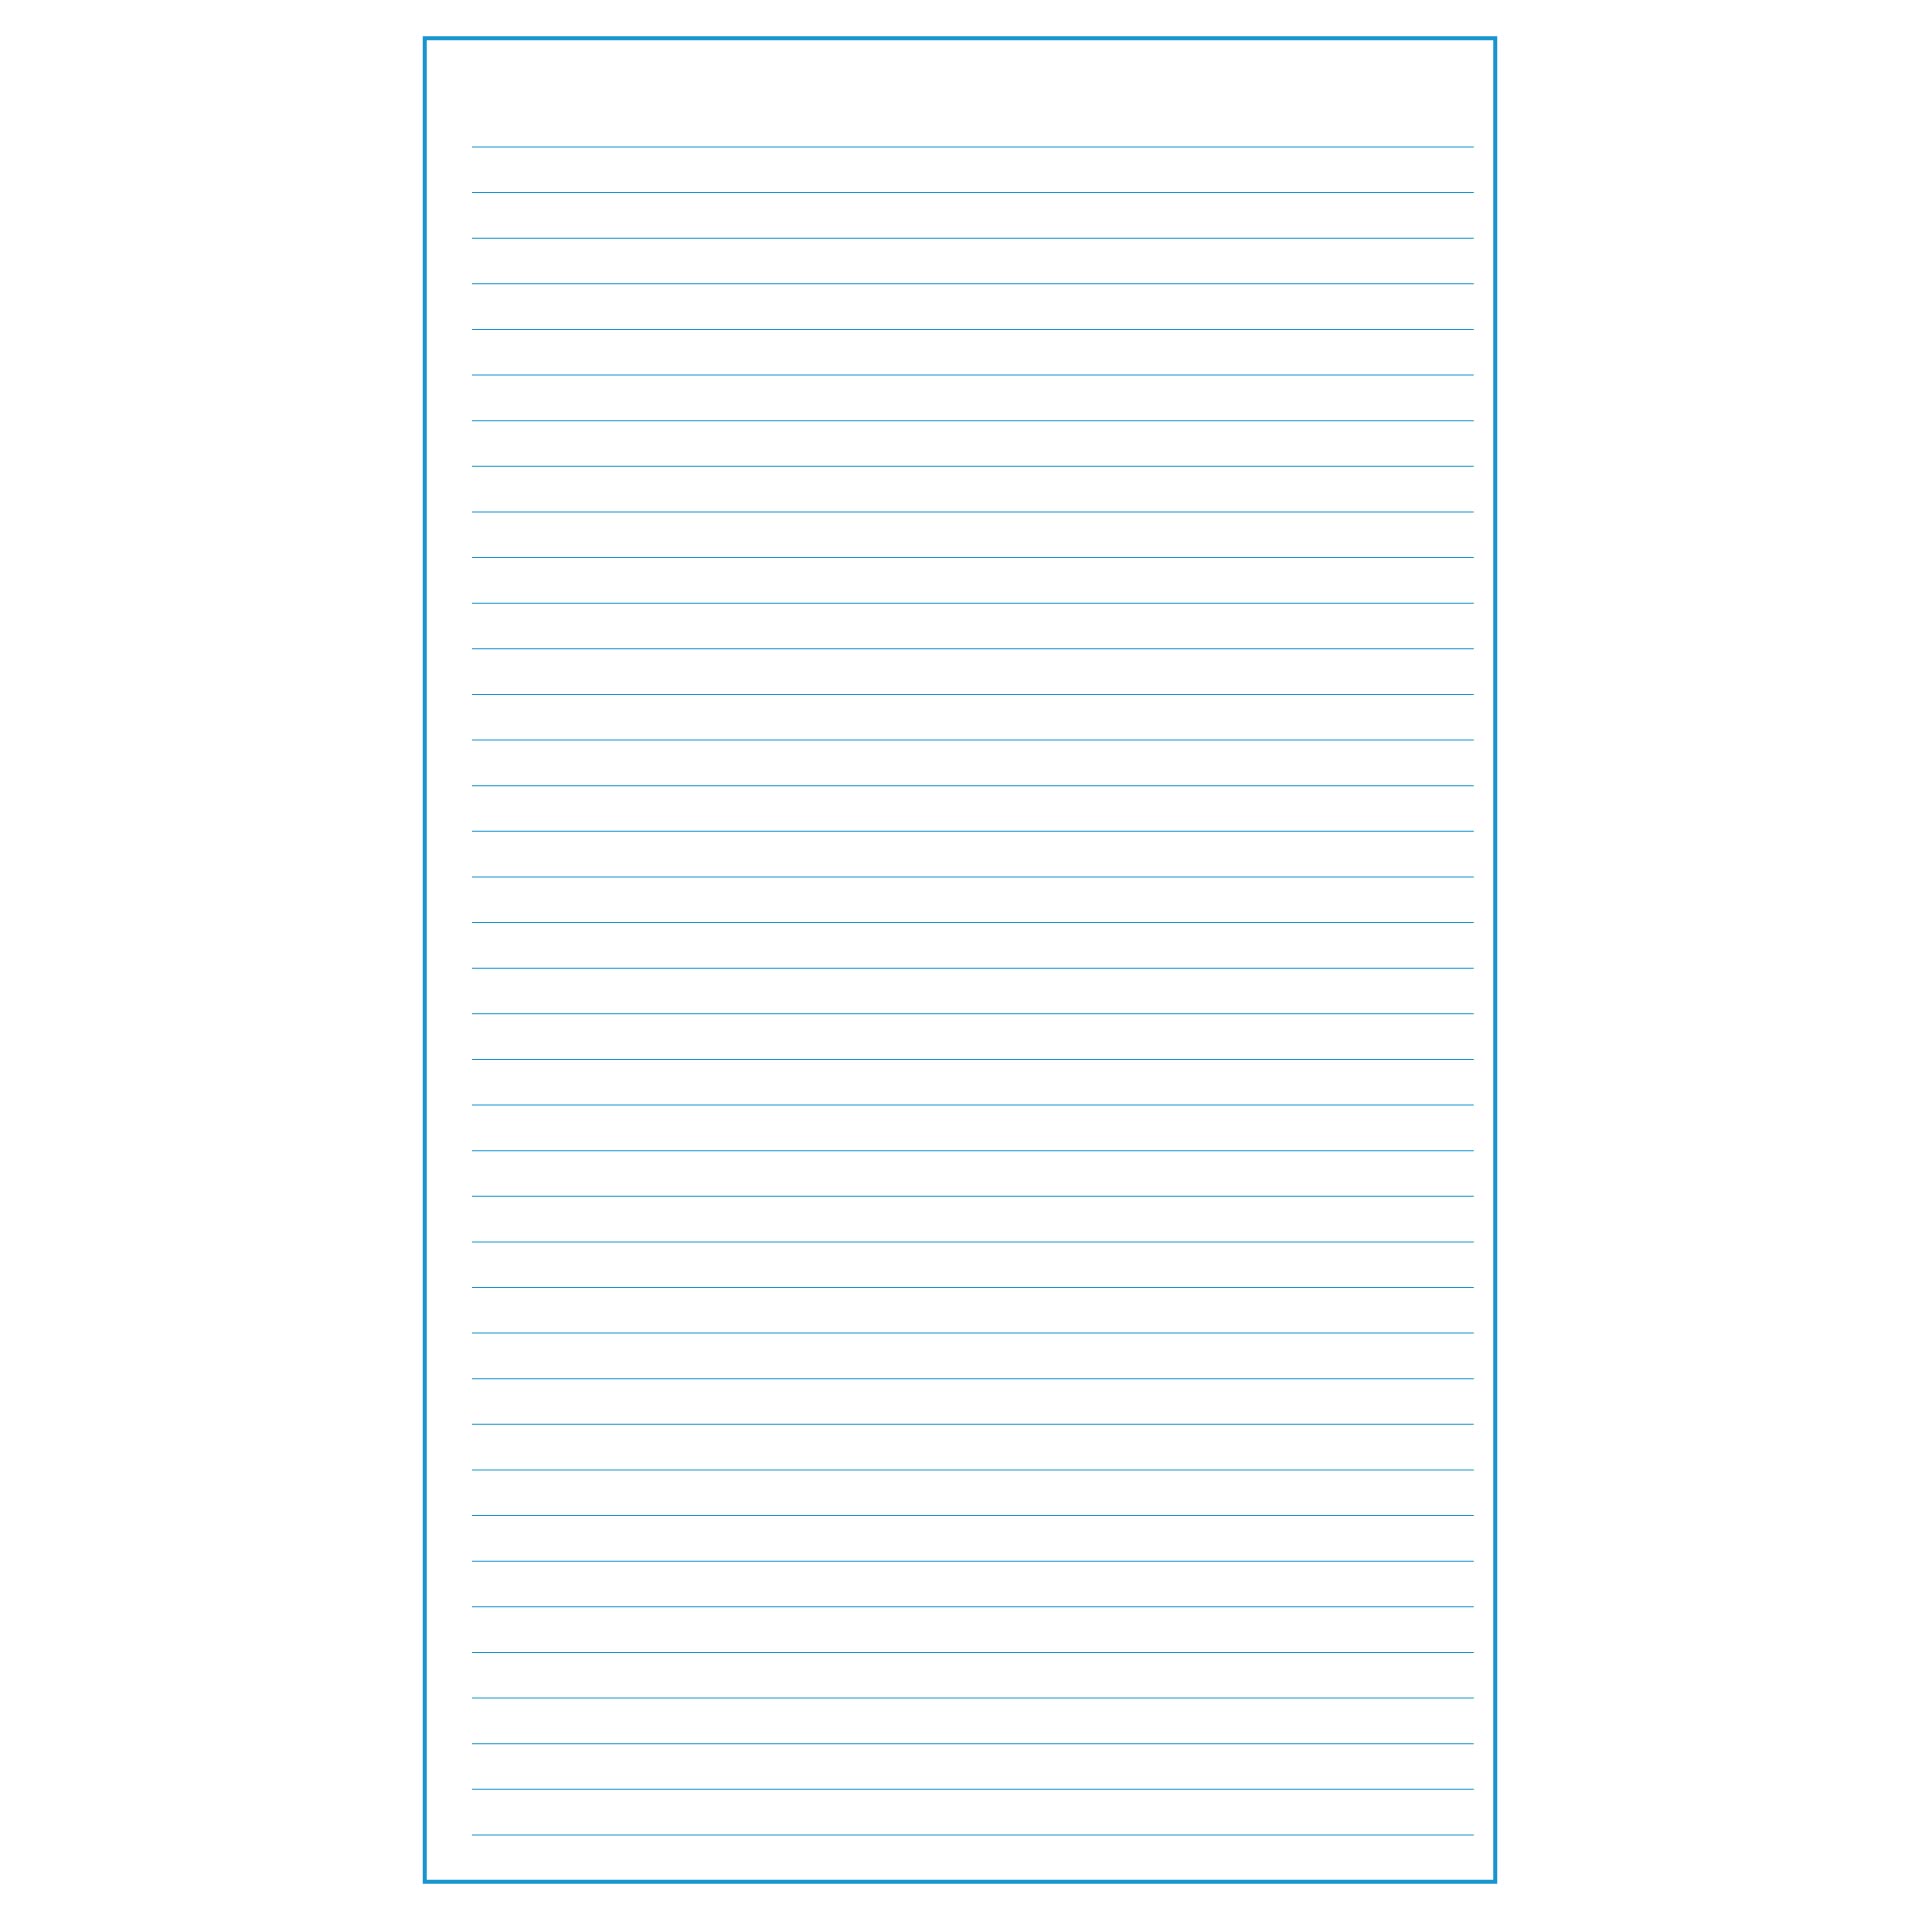 Blank Paper To Type On / View 22 Blank Sheet Of Paper To Type On And